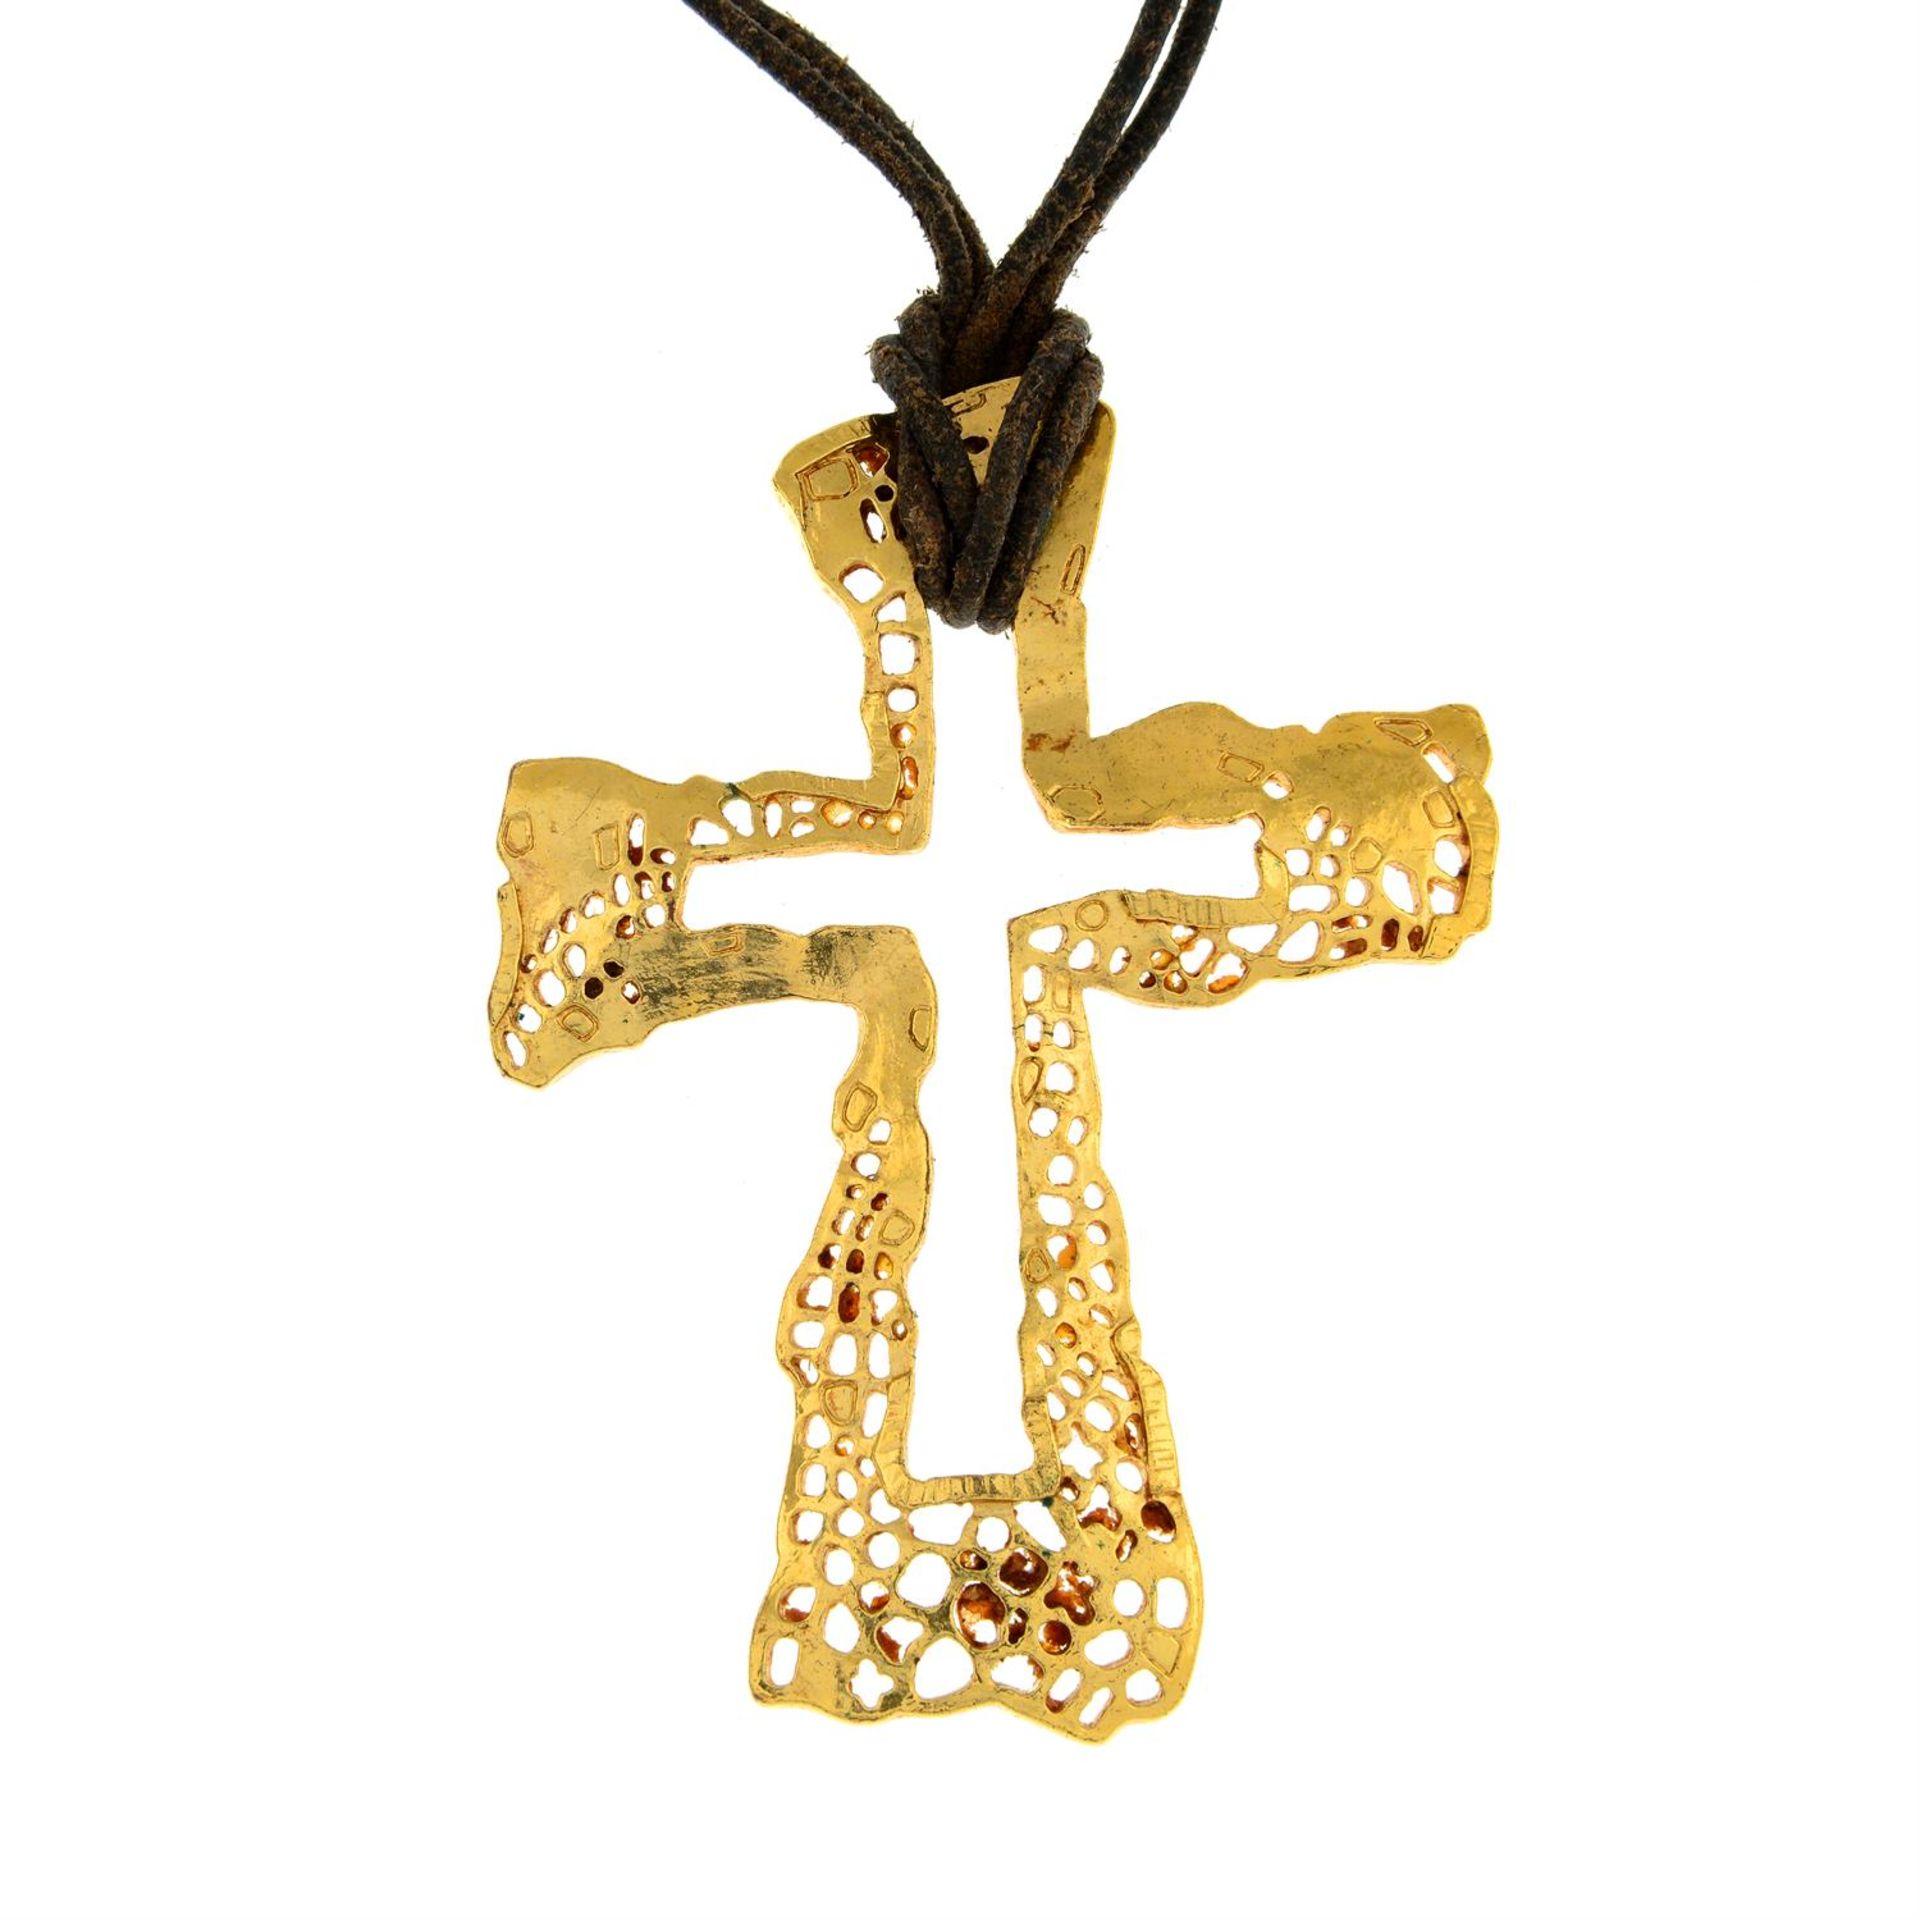 CHRISTIAN LACROIX - a cross pendant on leather cord.